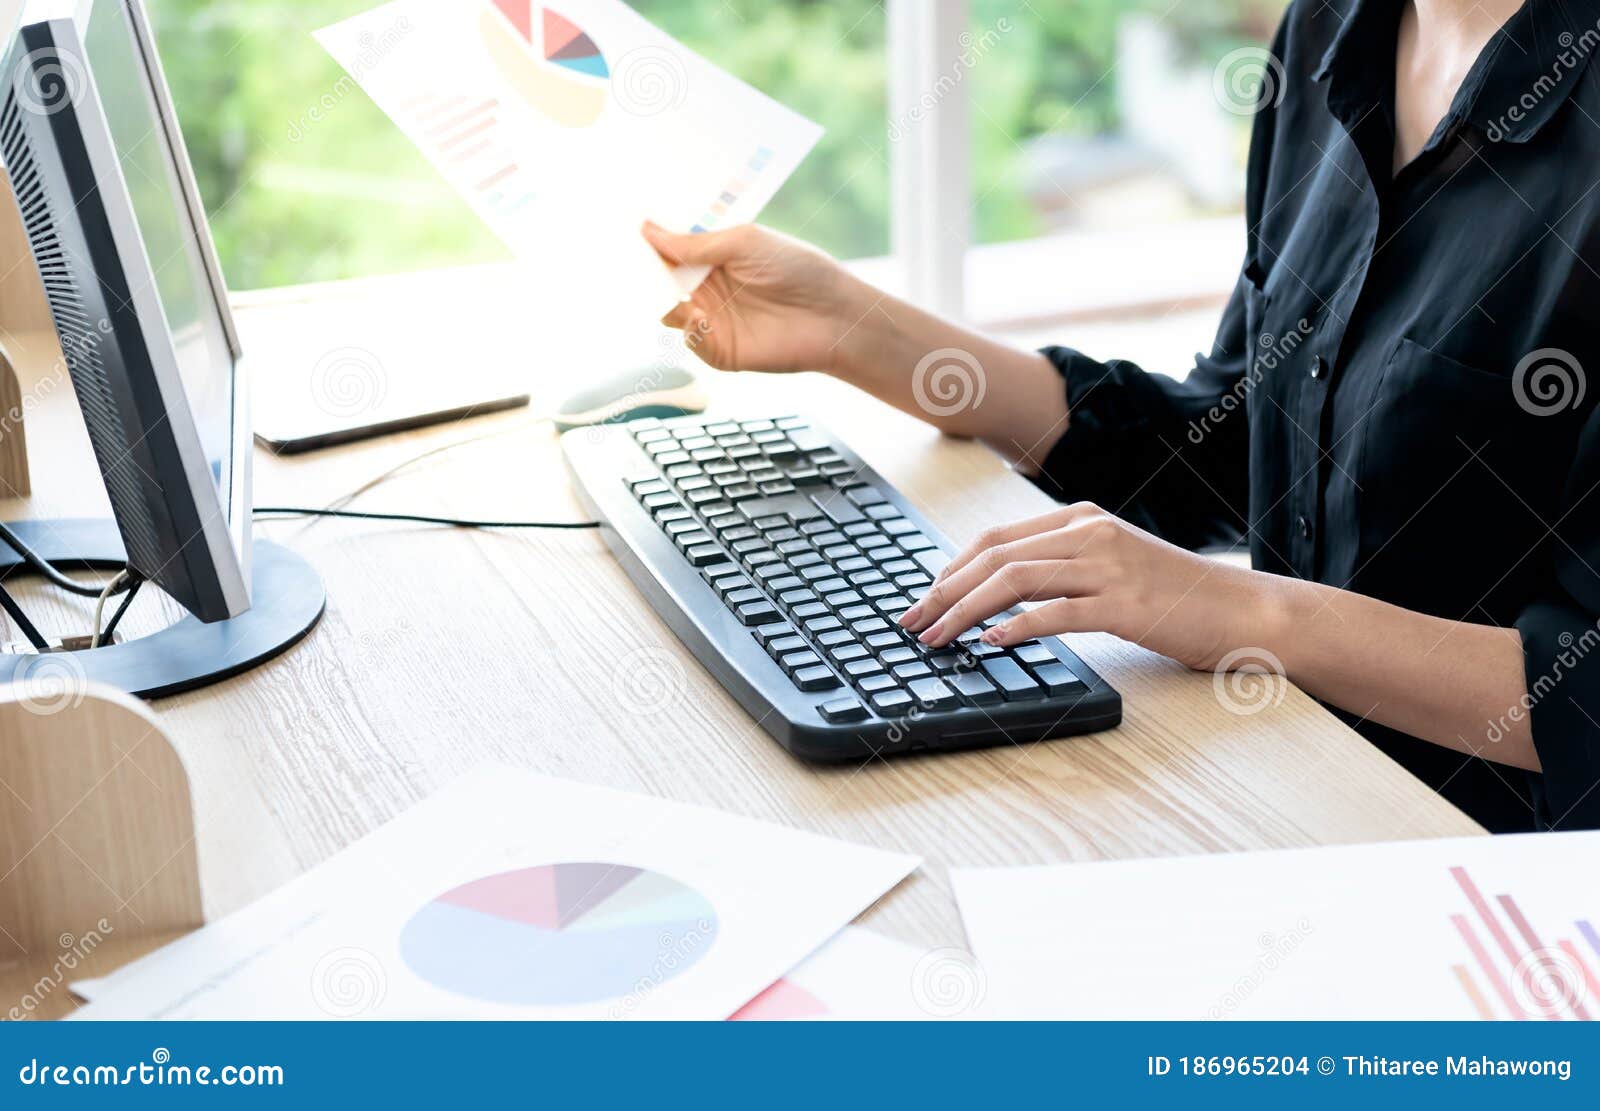 business woman using computer to analyze performance data from paper graph reports